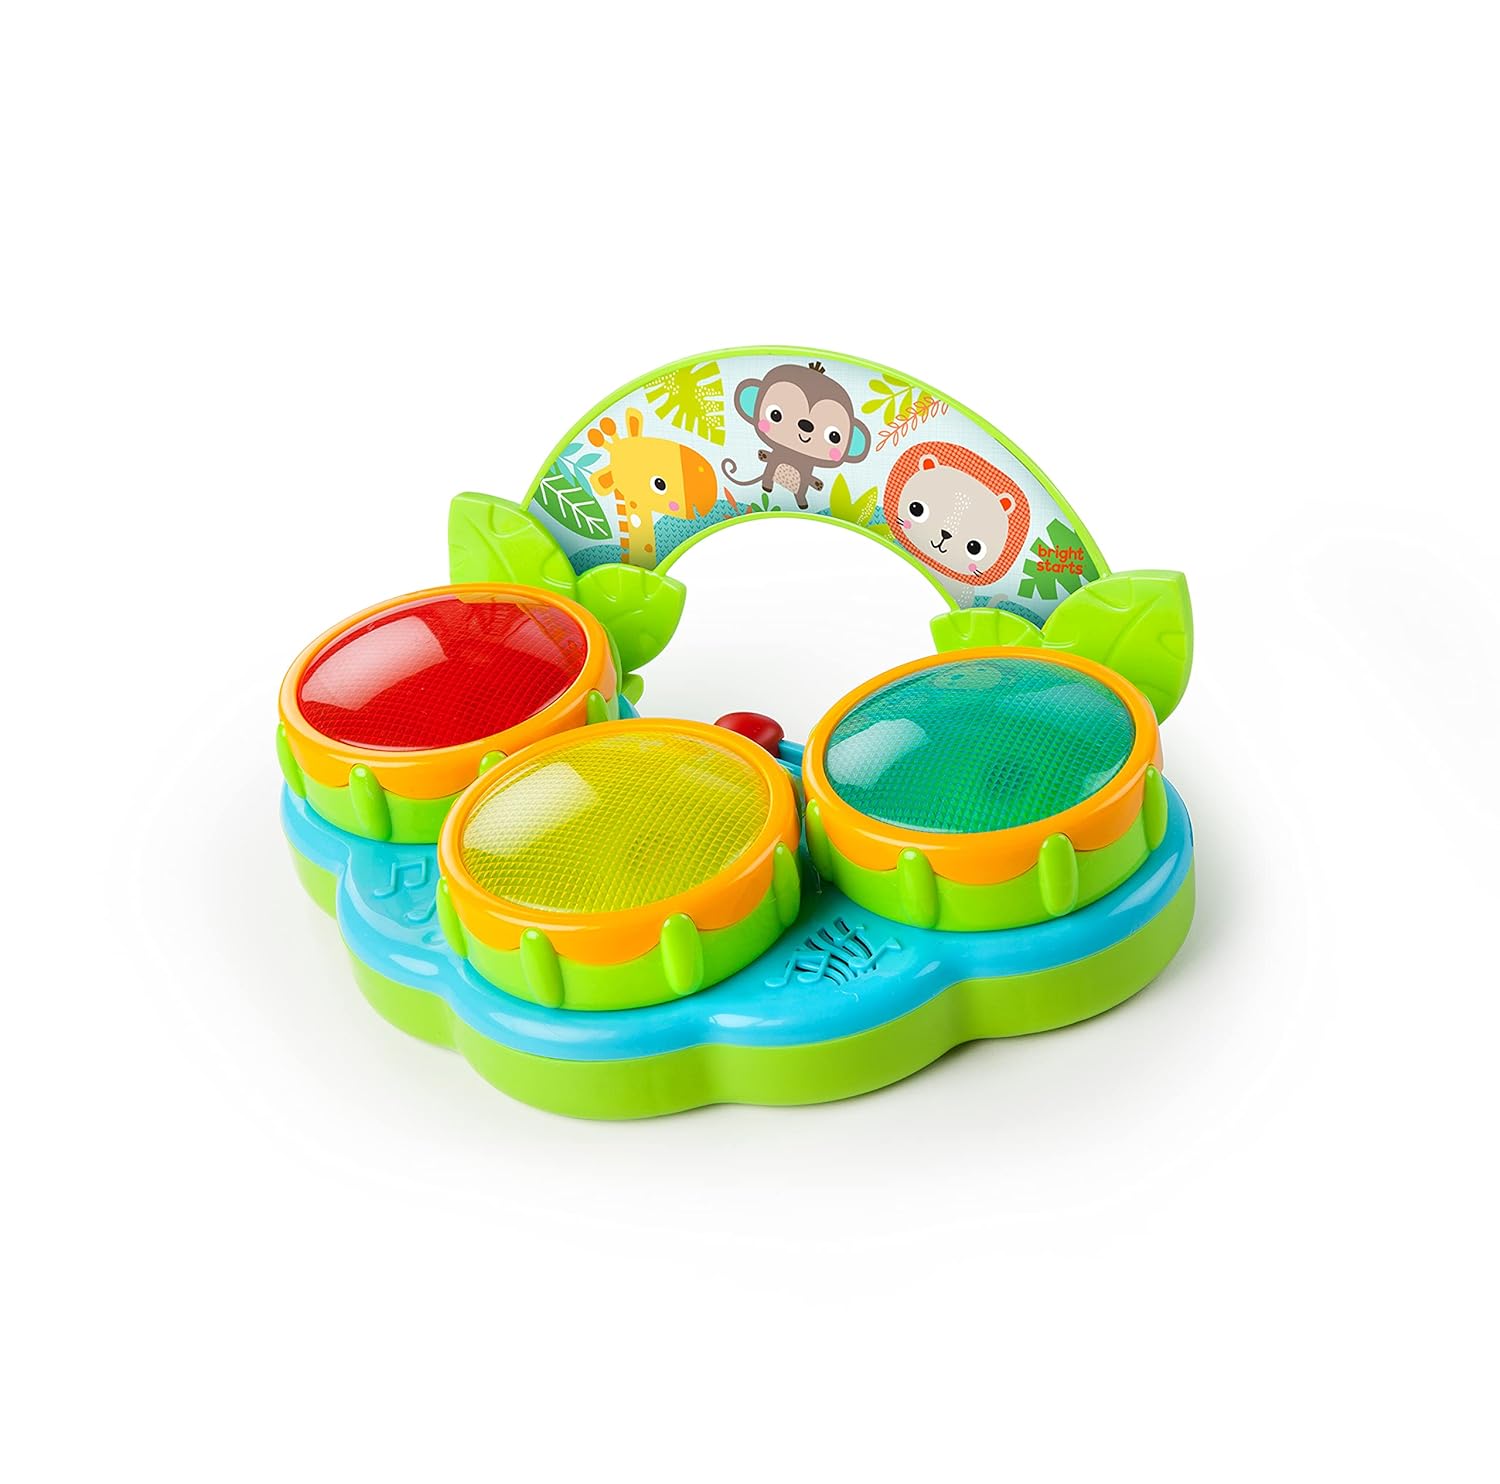 Bright Starts Safari Beats Musical Drum Toy with Lights, Ages 3 Months+